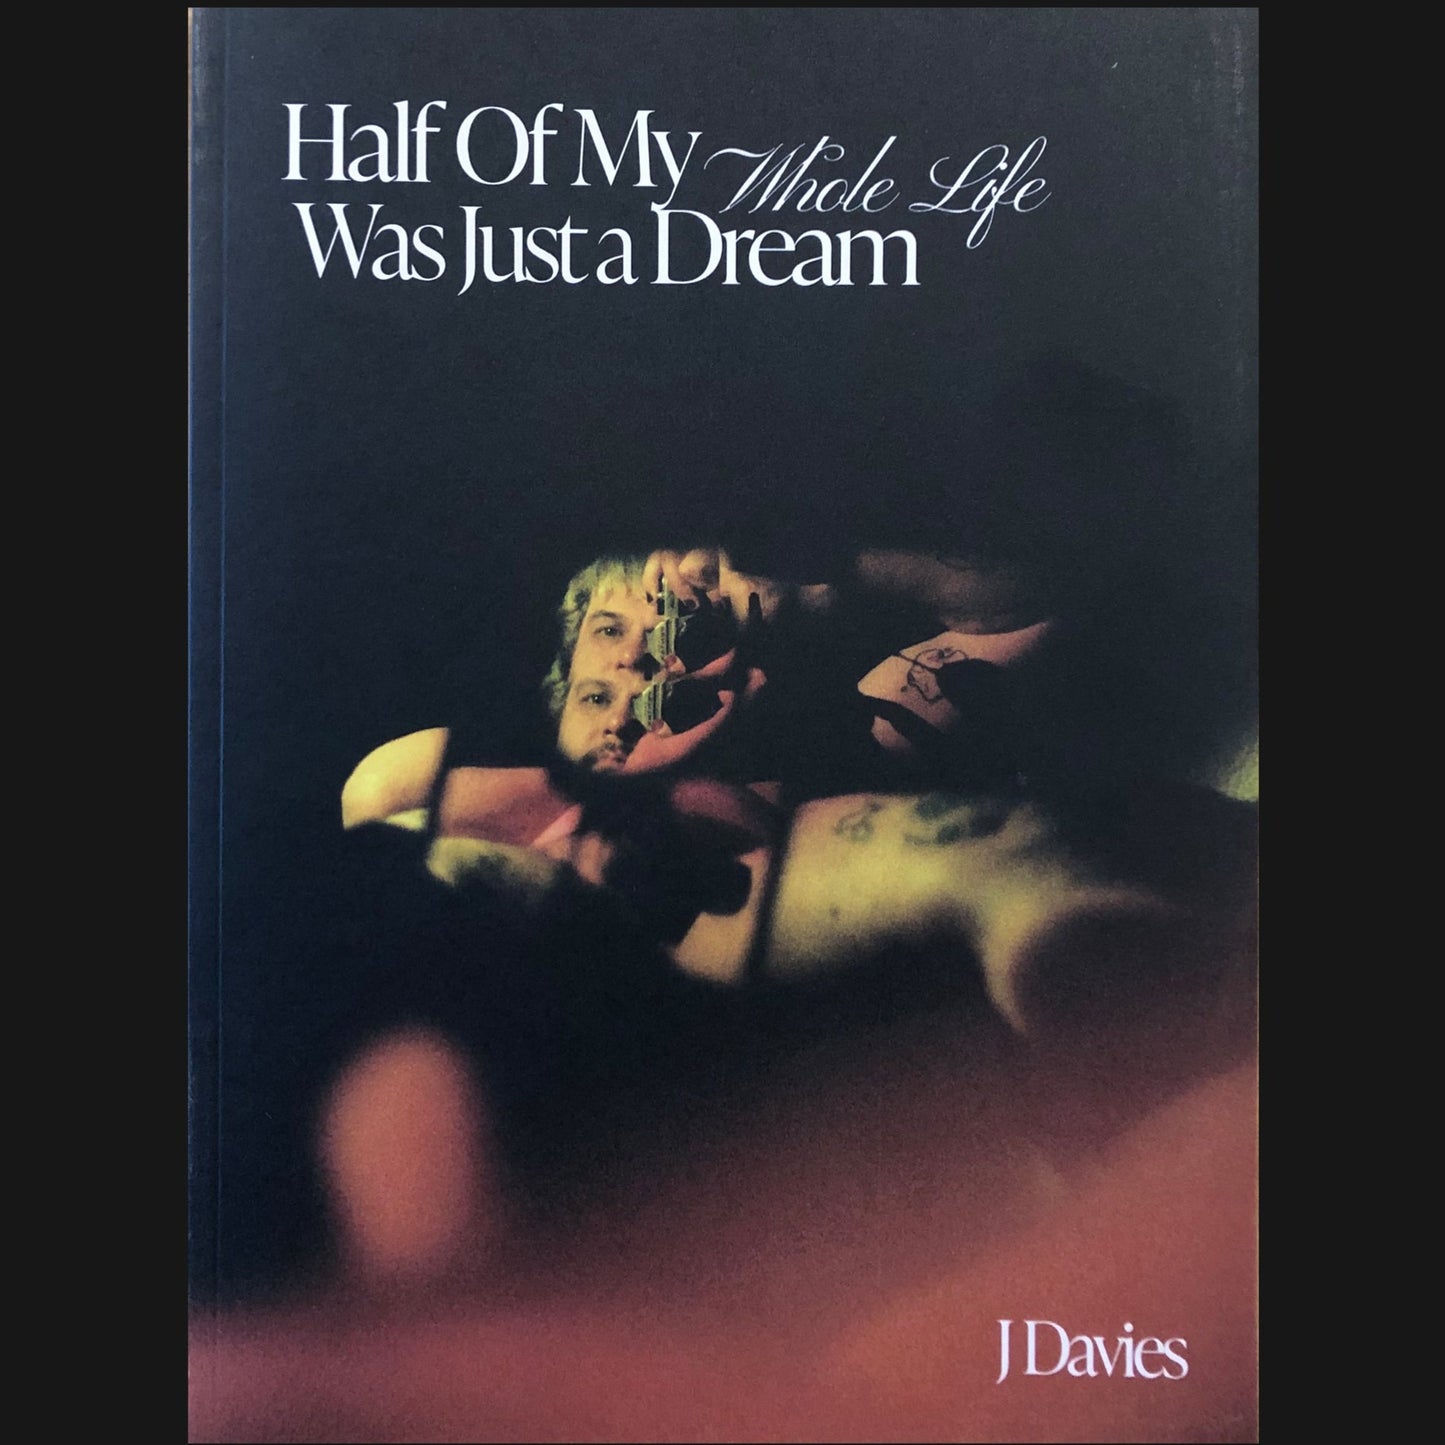 J DAVIES  - "HALF OF MY WHOLE LIFE WAS JUST A DREAM" BOOK